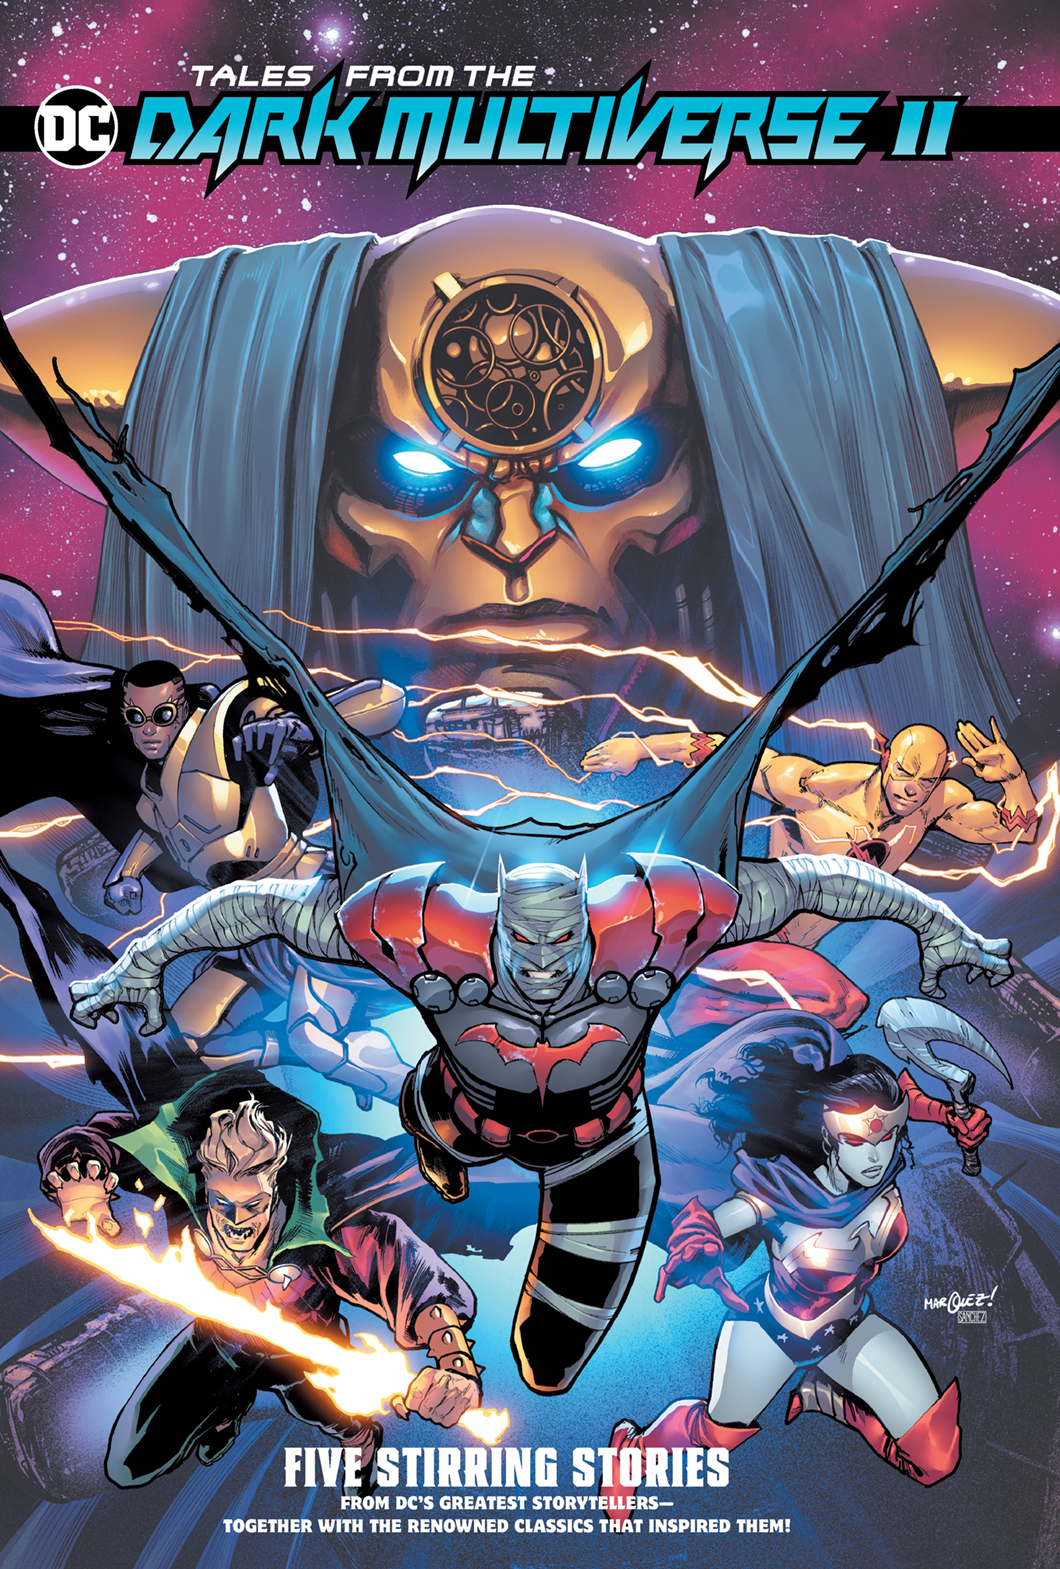 Tales From The DC Dark Multiverse II Graphic Novel